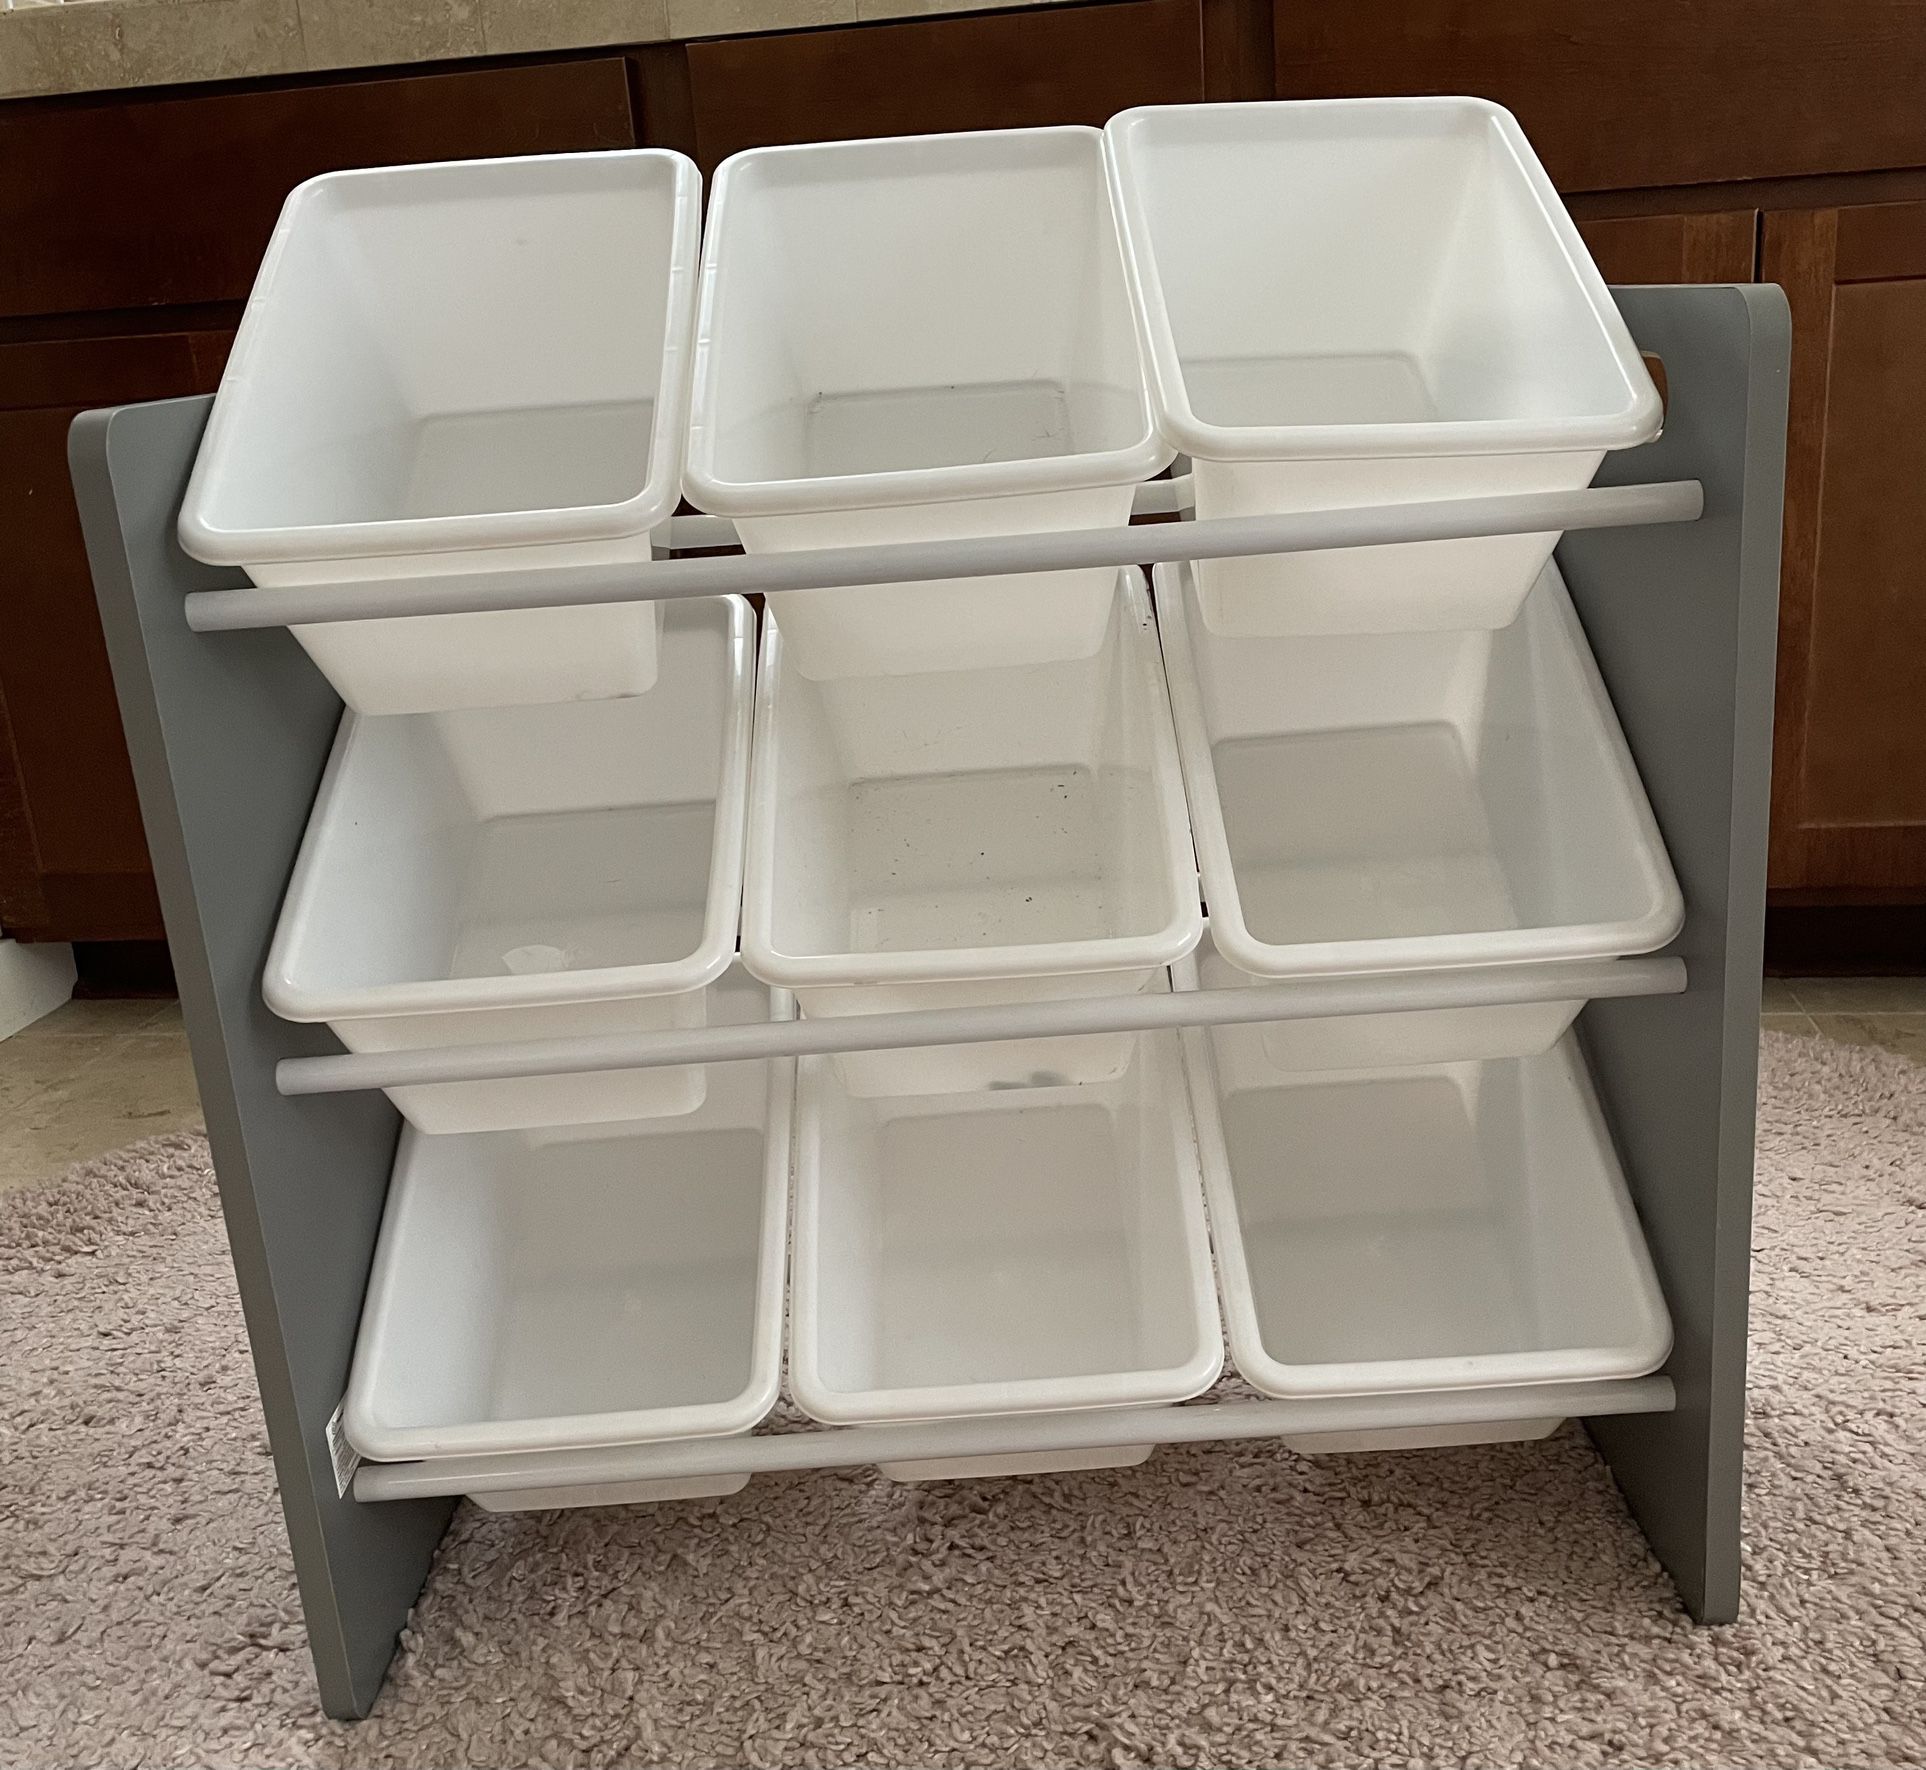 Toy Organizer Comes With 9 Bins